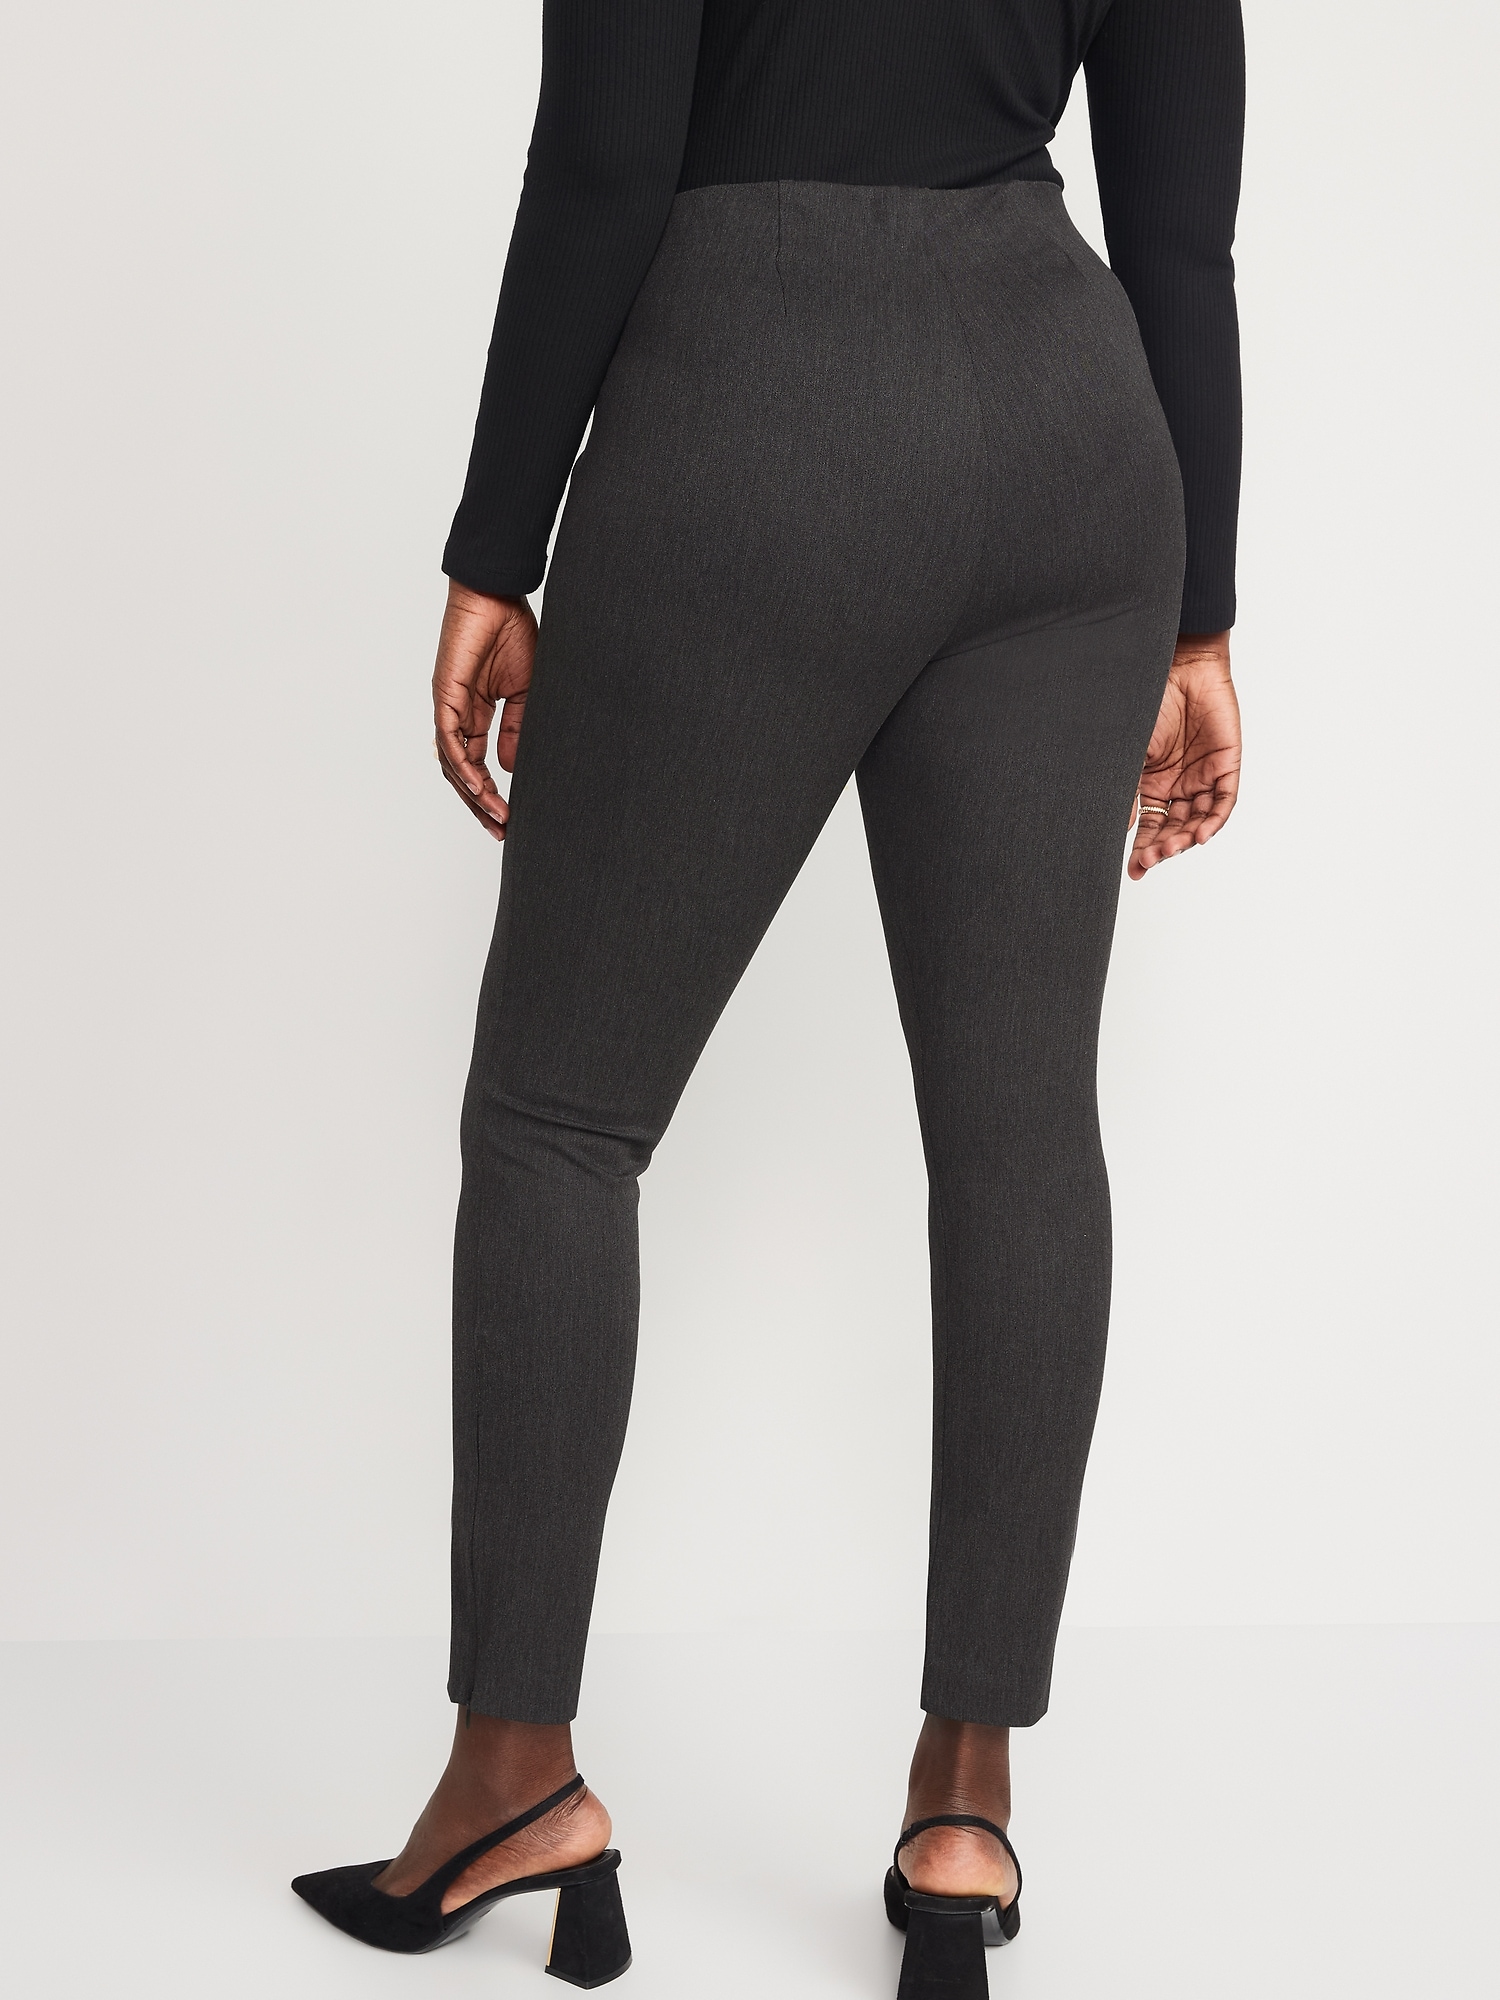 High-Rise Pixie Side-Zip Pants for Women